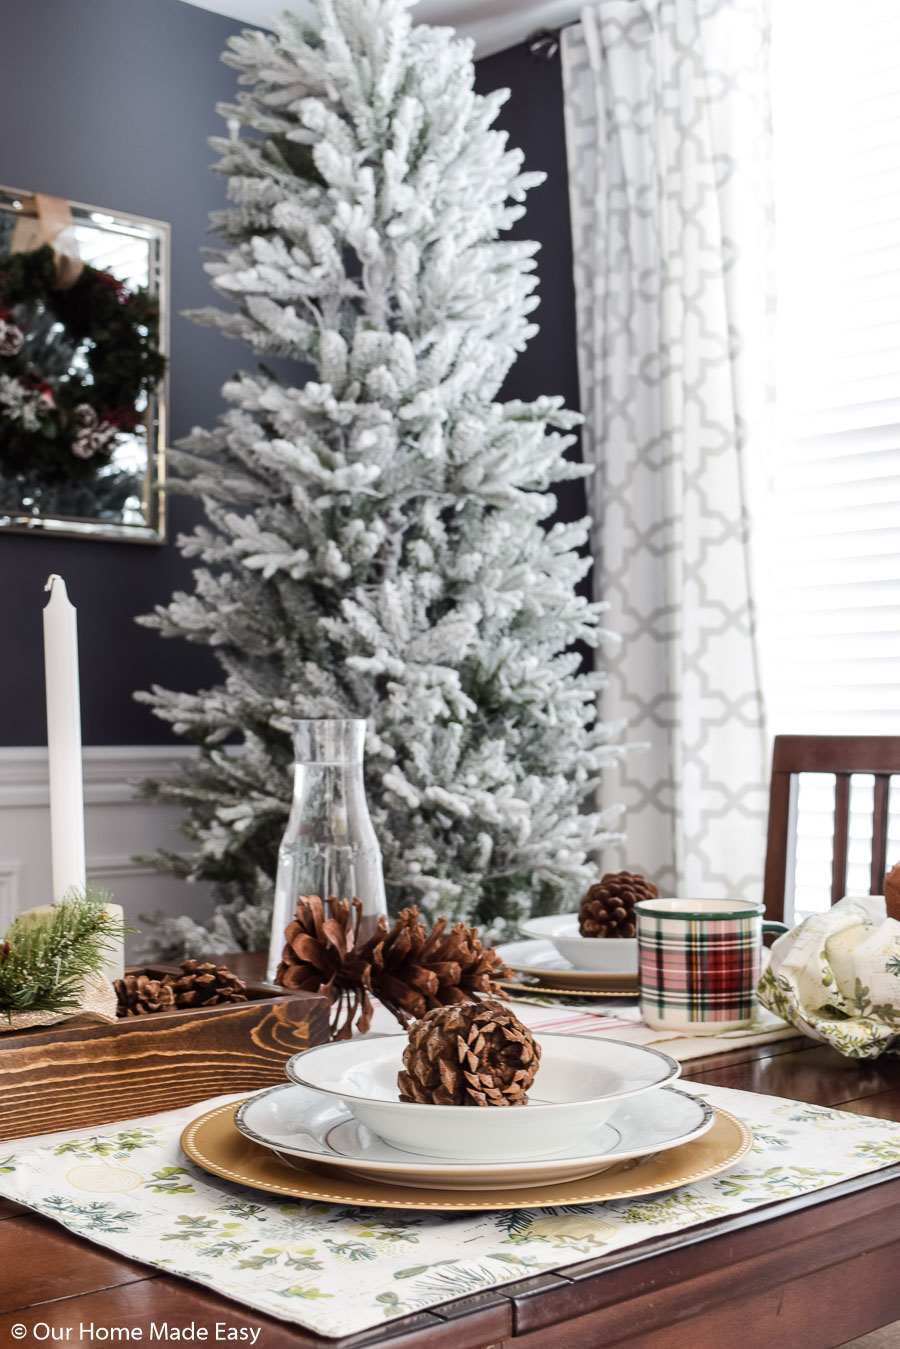 Christmas place settings with gold and white flateware, decorative pinecones, and a white-frosted Christmas tree